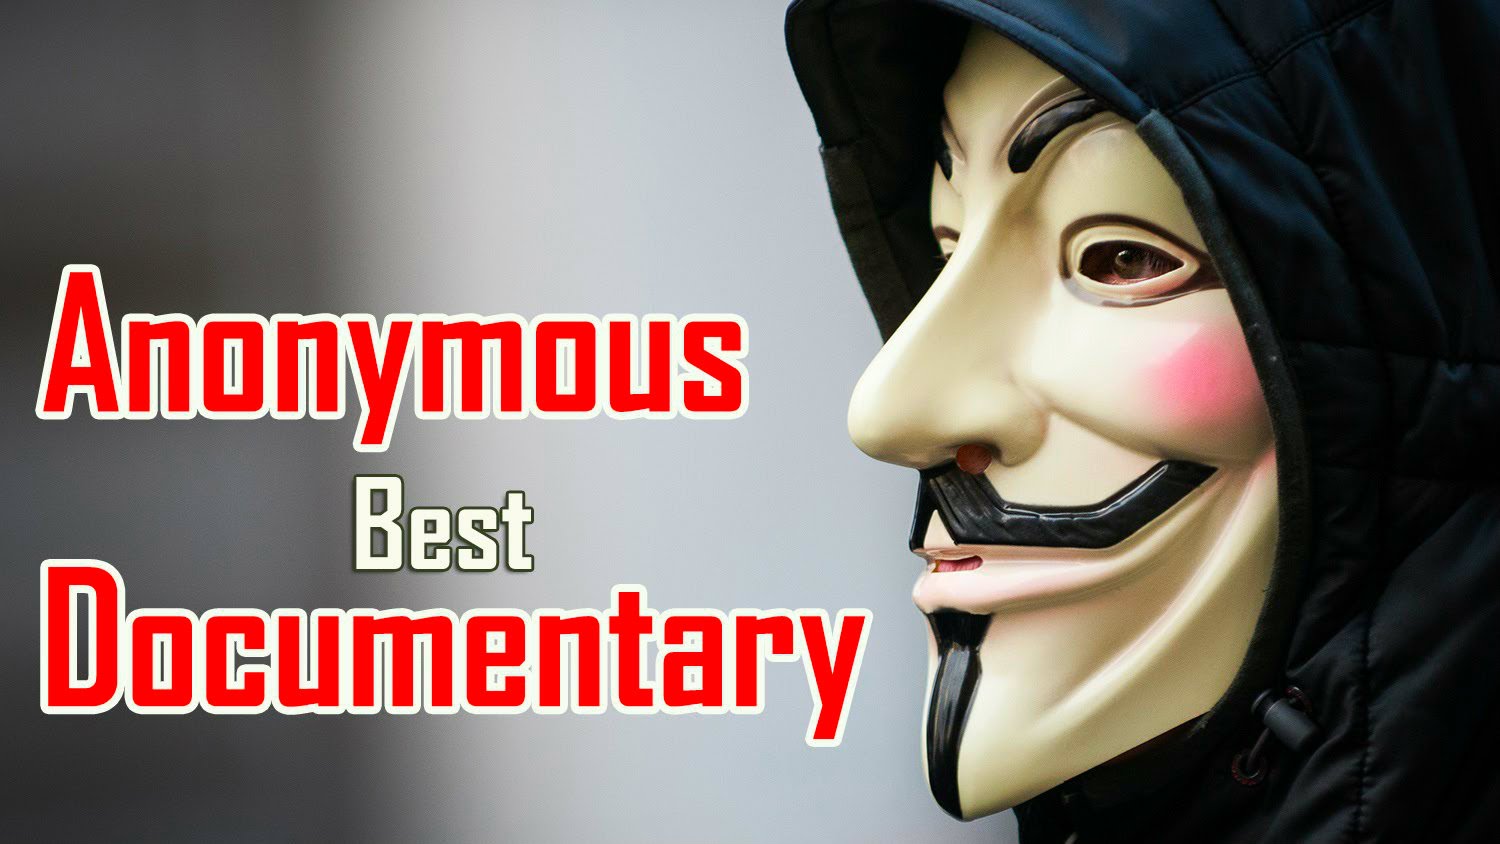 Anonymous Documentary – How Anonymous Hackers Changed the World Full Documentary